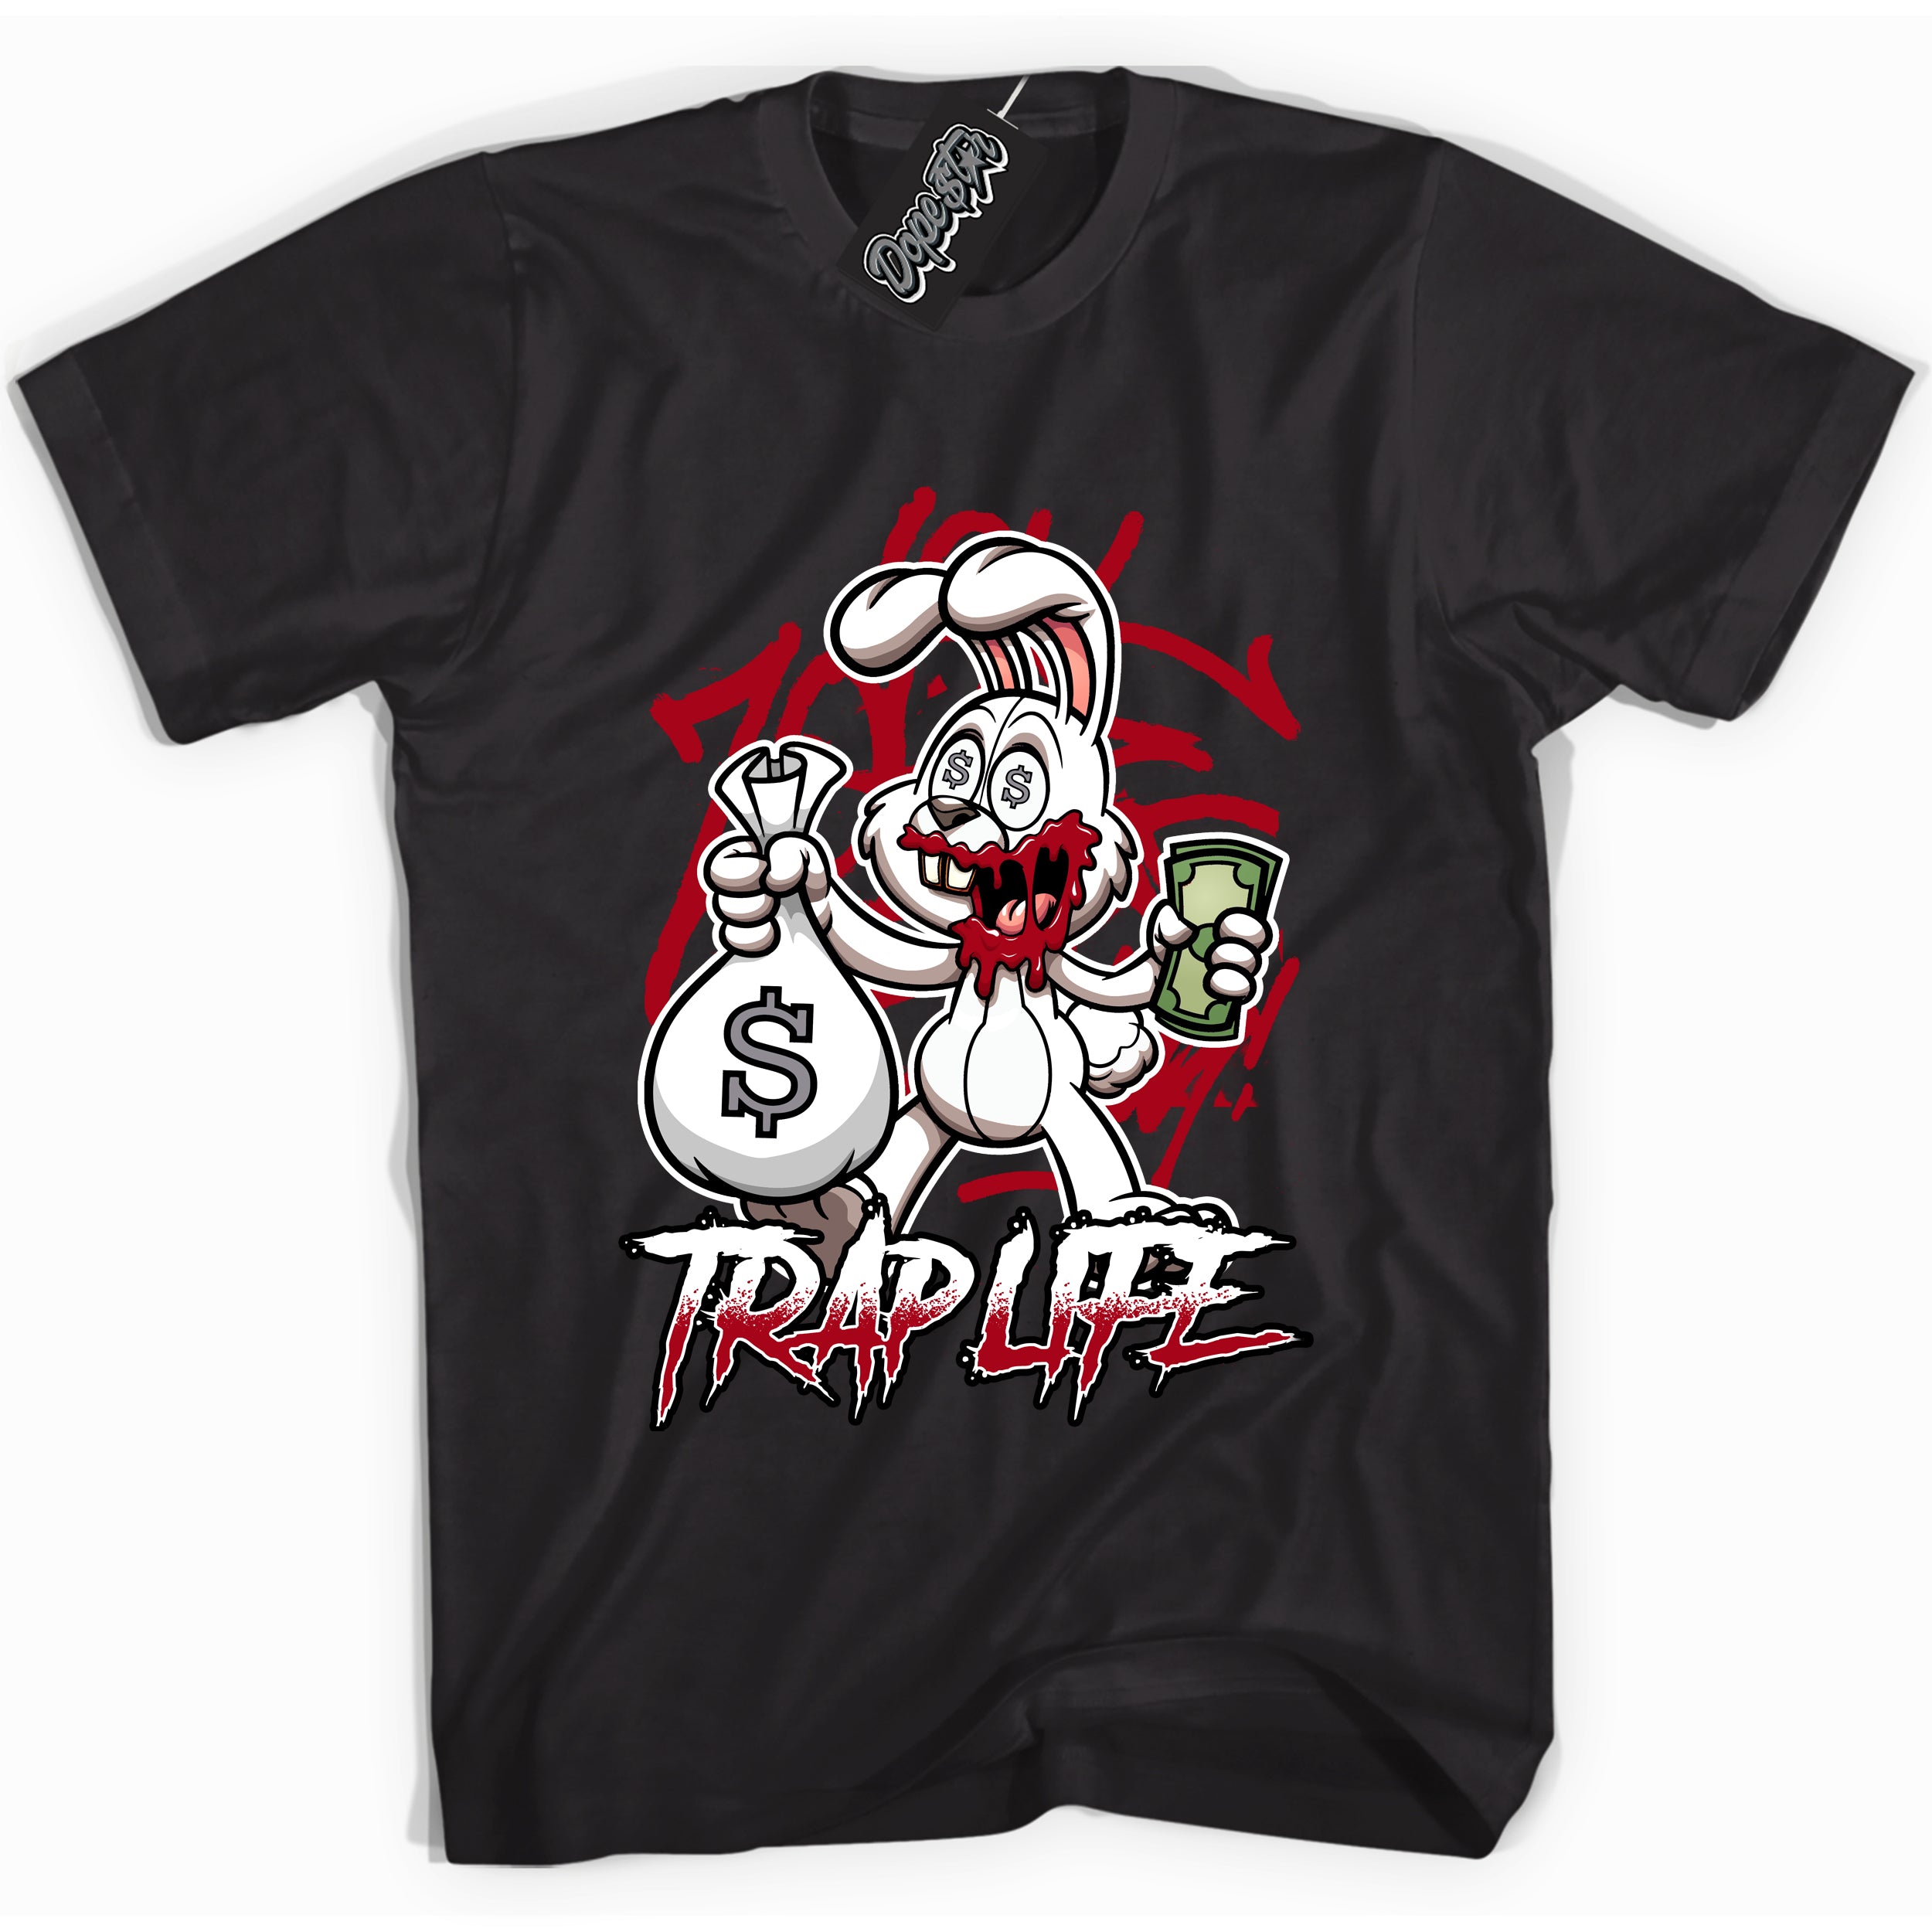 Cool Black Shirt with “ Trap Rabbit” design that perfectly matches Bred Reimagined 4s Jordans.